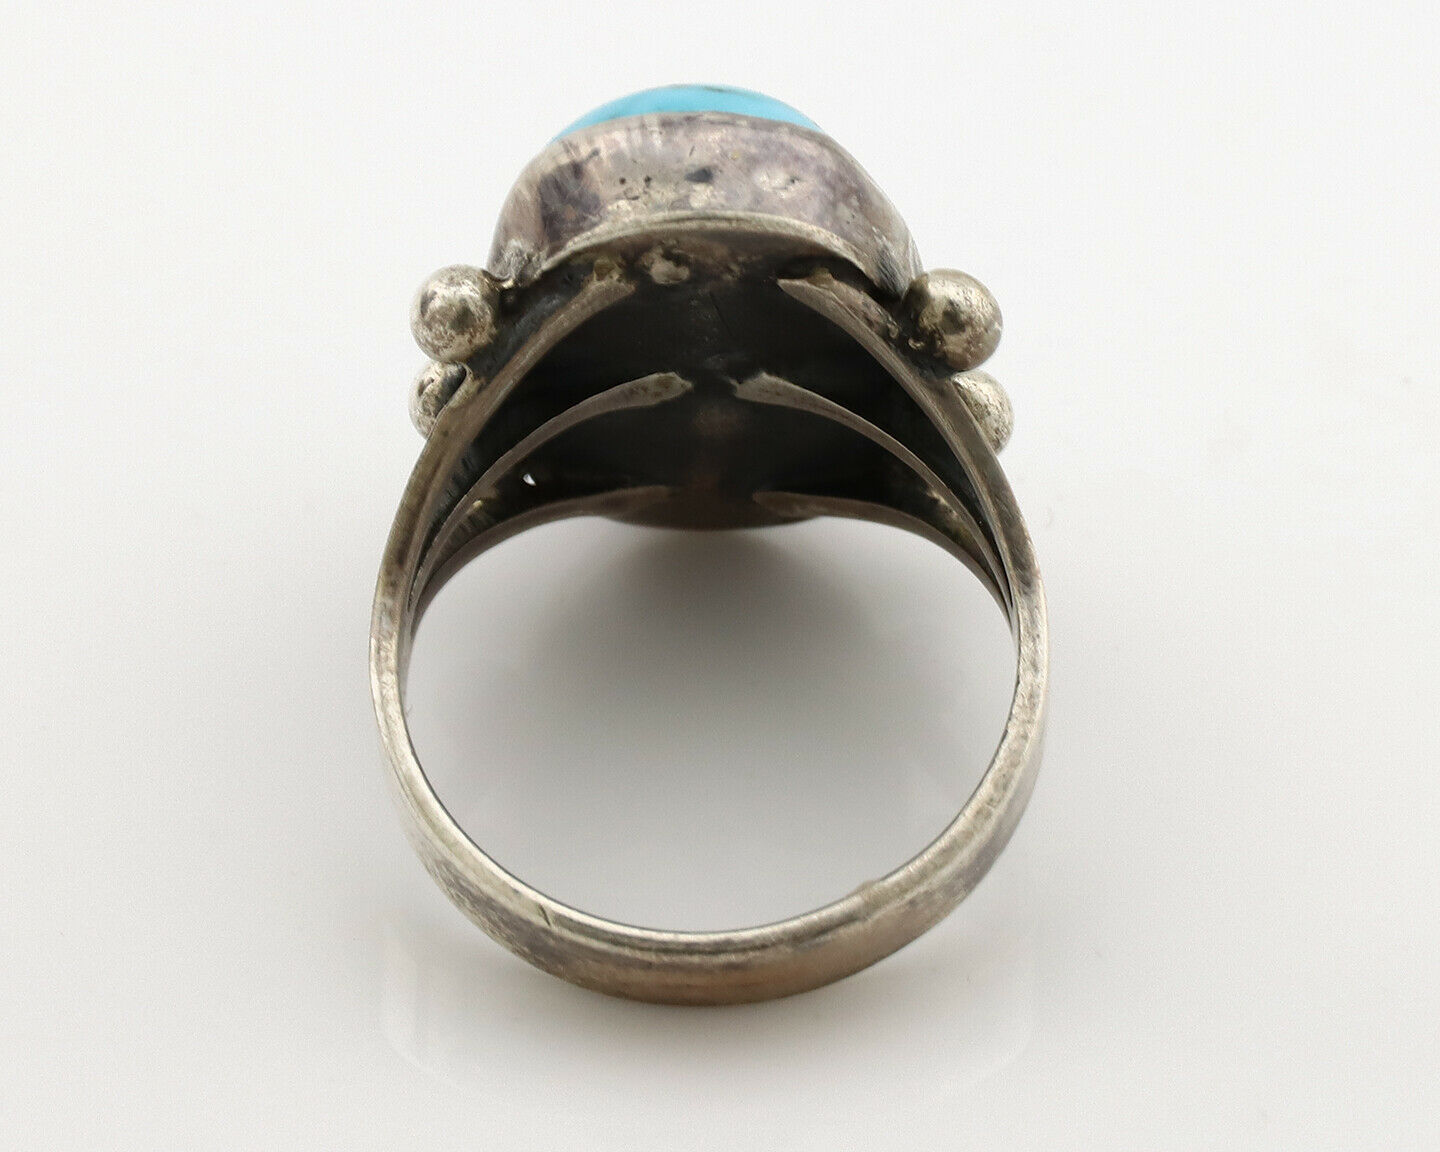 Navajo Ring .925 Silver Morenci Turquoise Native American Artist C80s